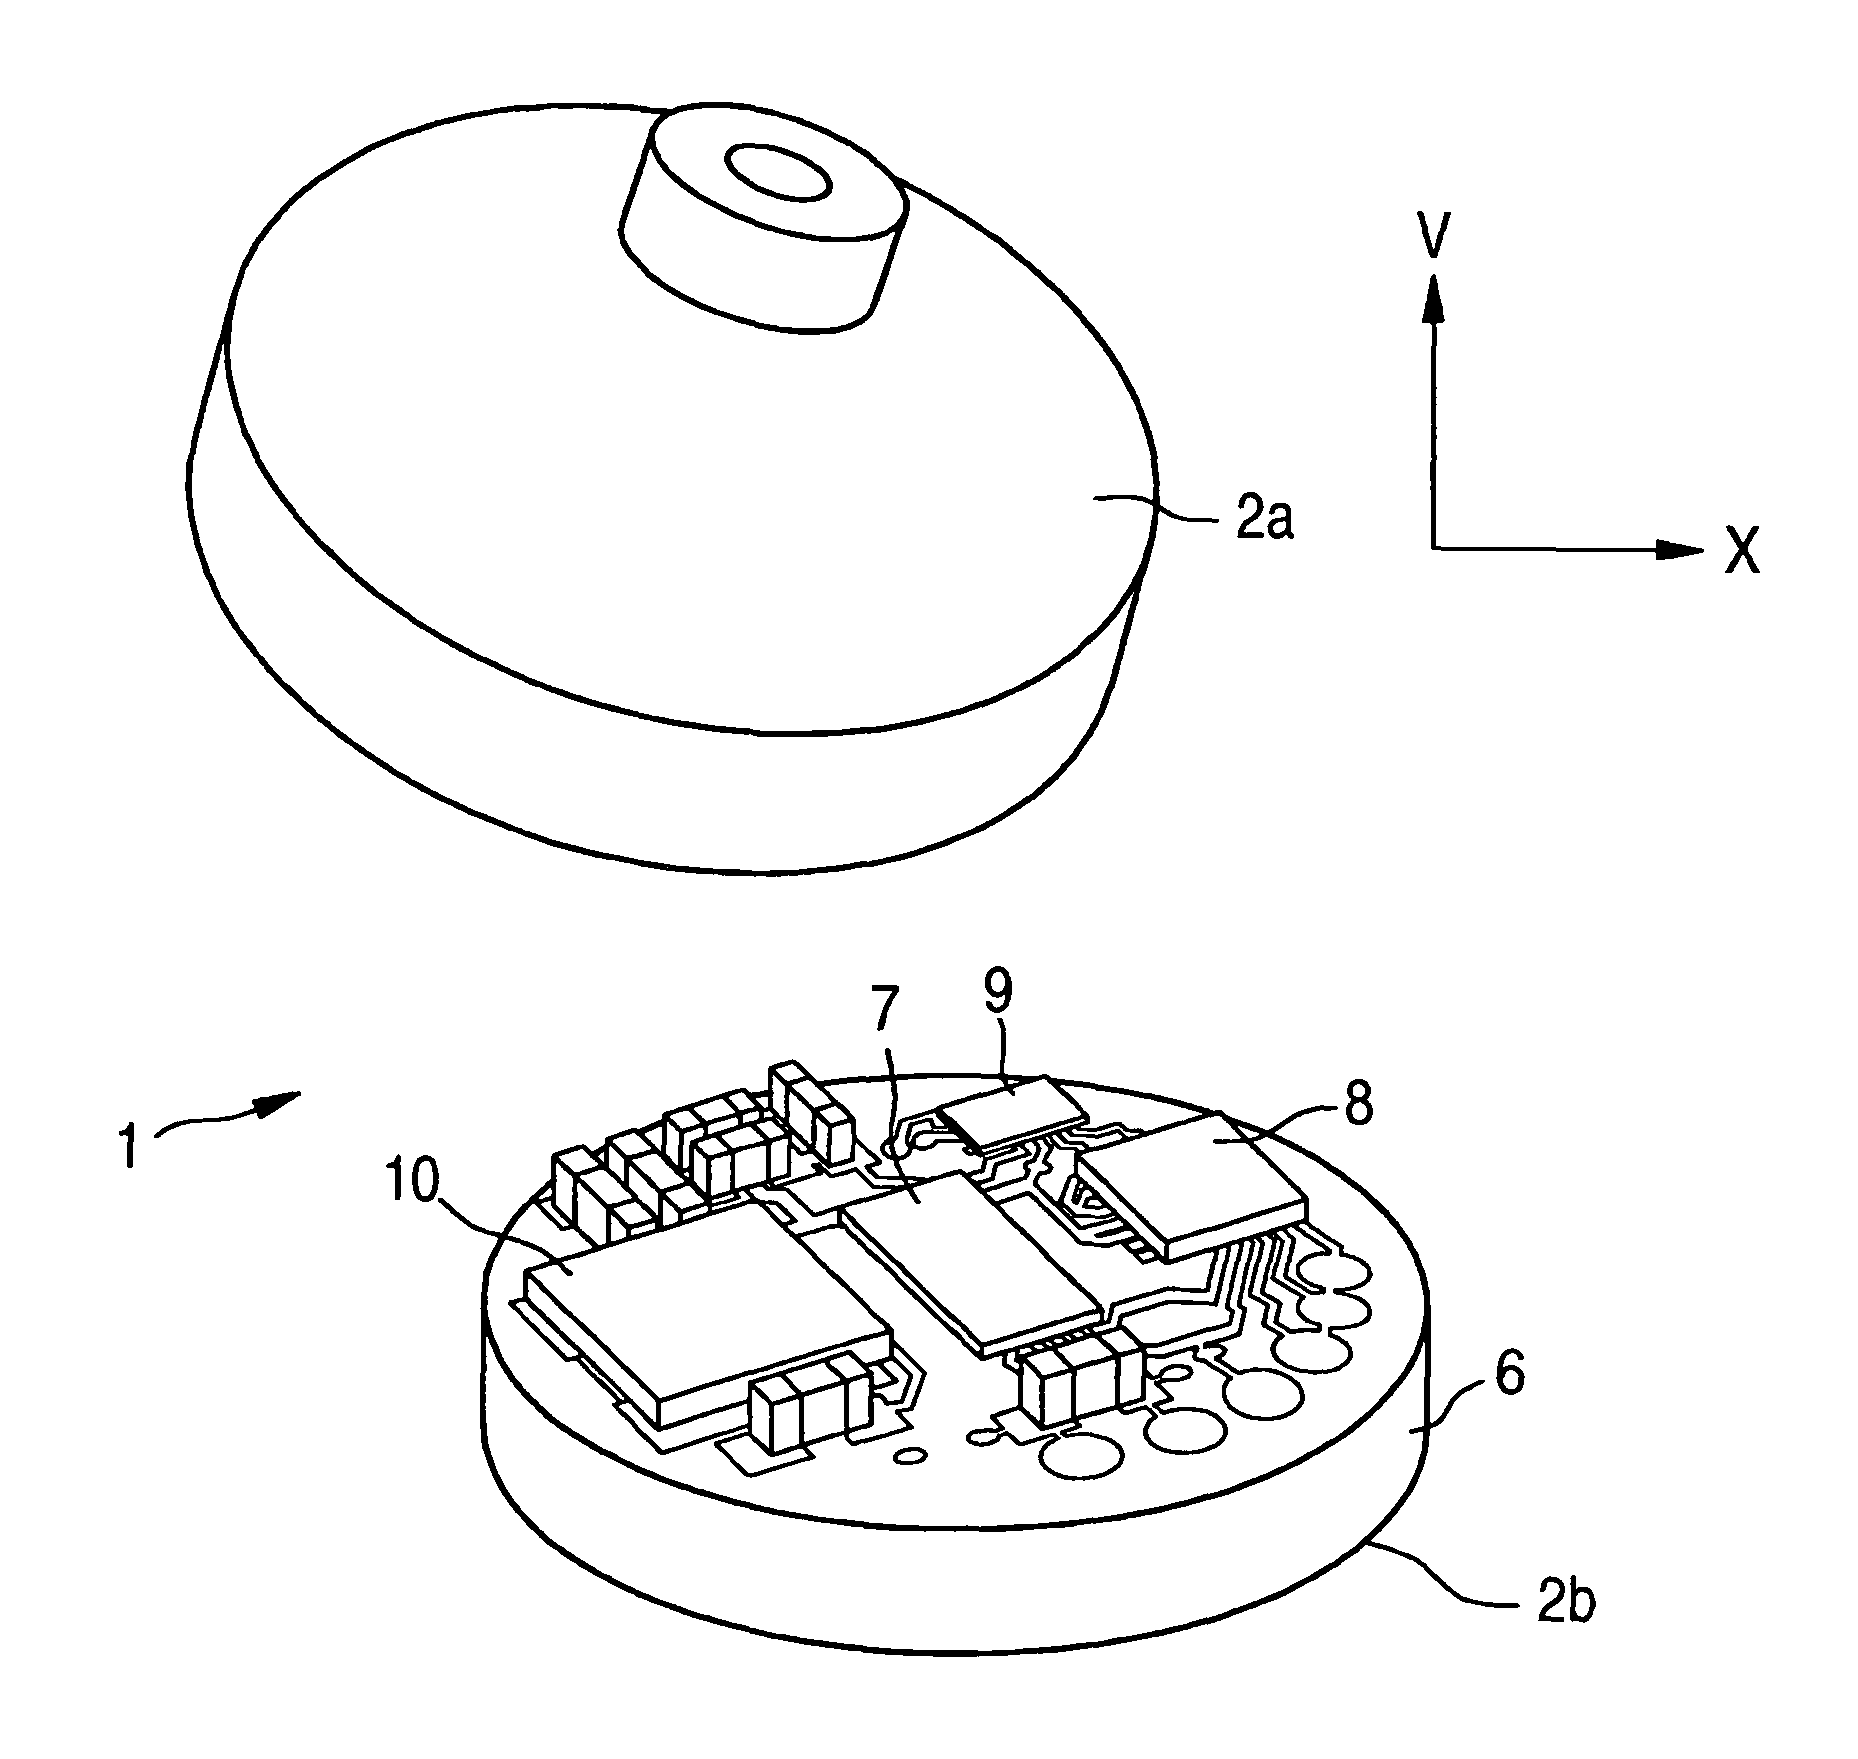 Tire sensor module and method for its manufacture